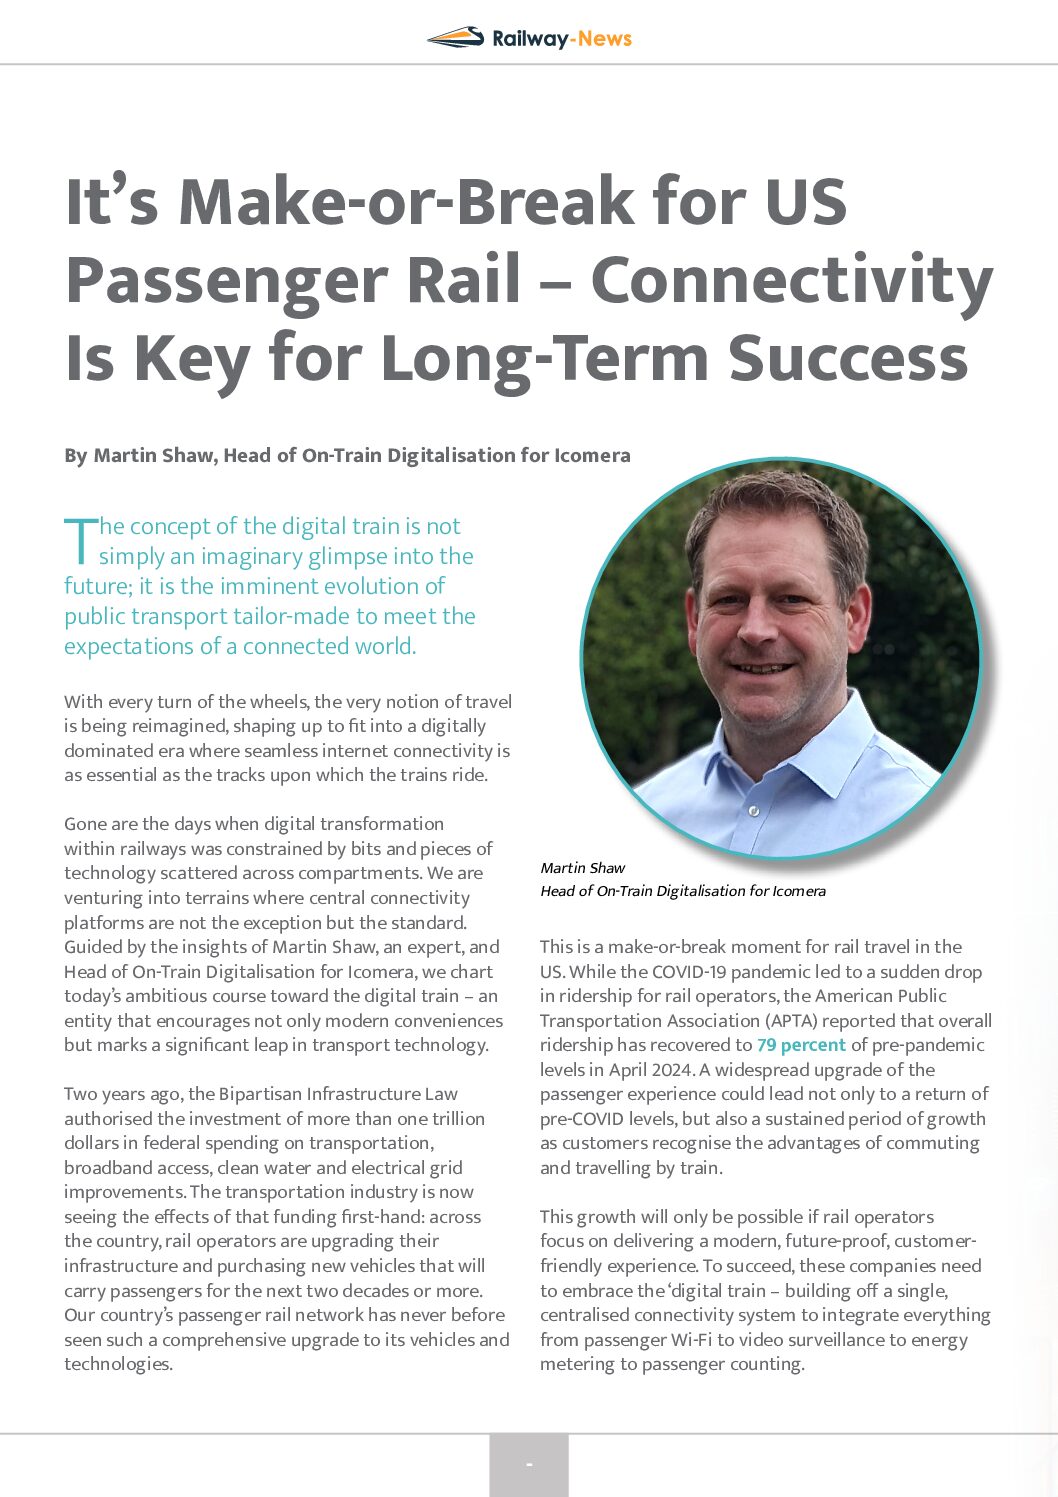 It’s Make-or-Break for US Passenger Rail – Connectivity Is Key for Long-Term Success